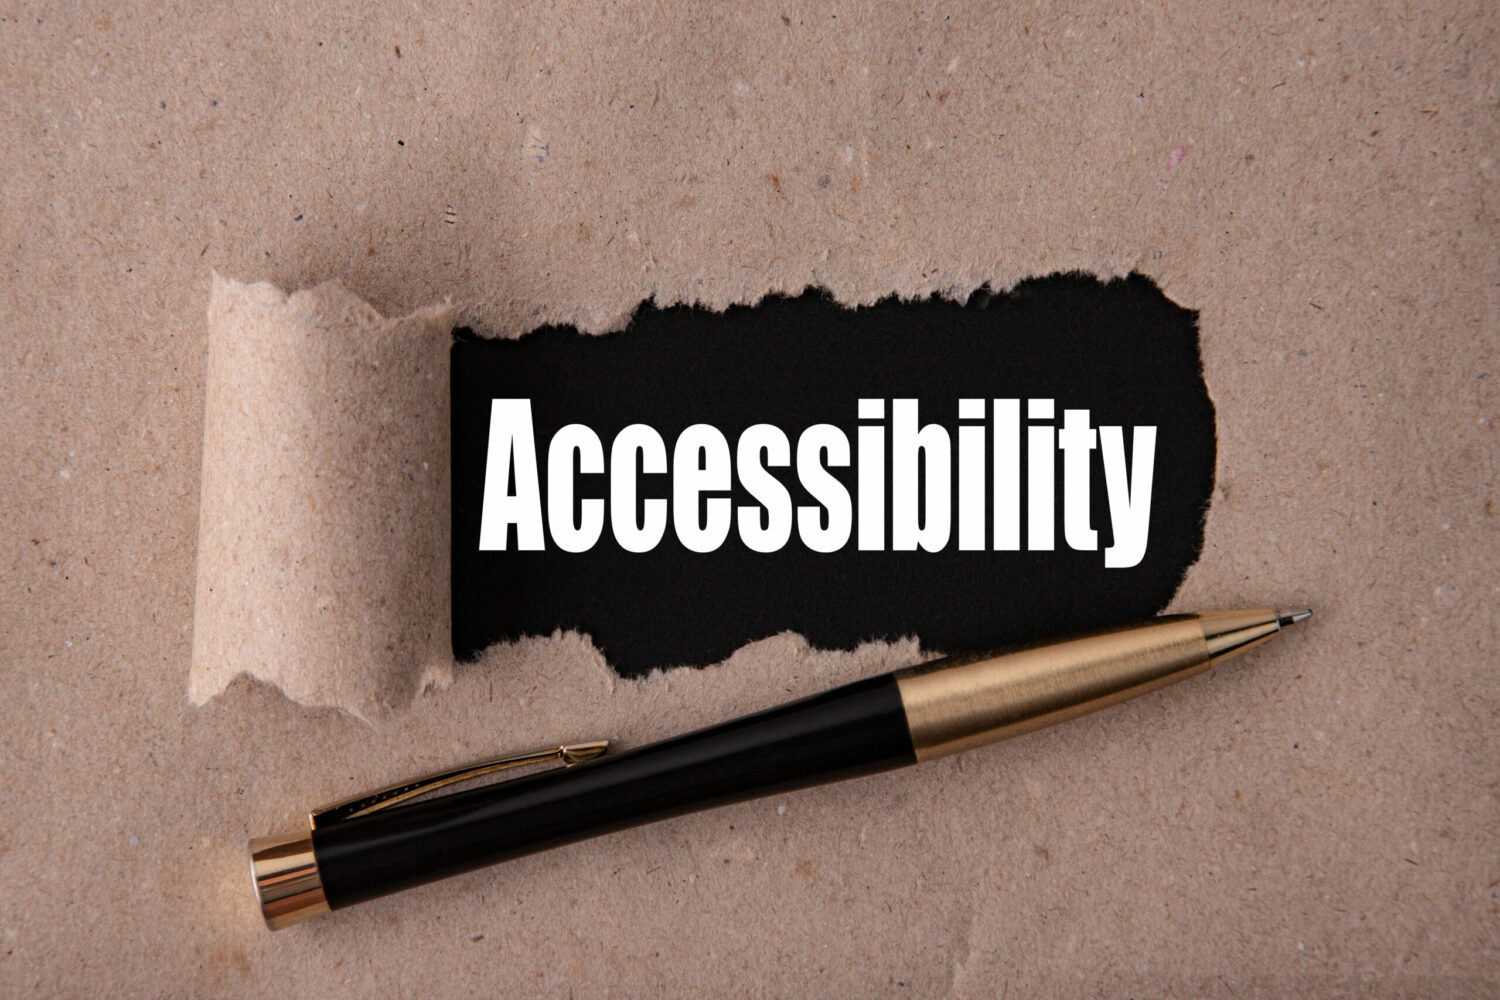 The word "Accessibility" is written under torn paper, with a pen just underneath it